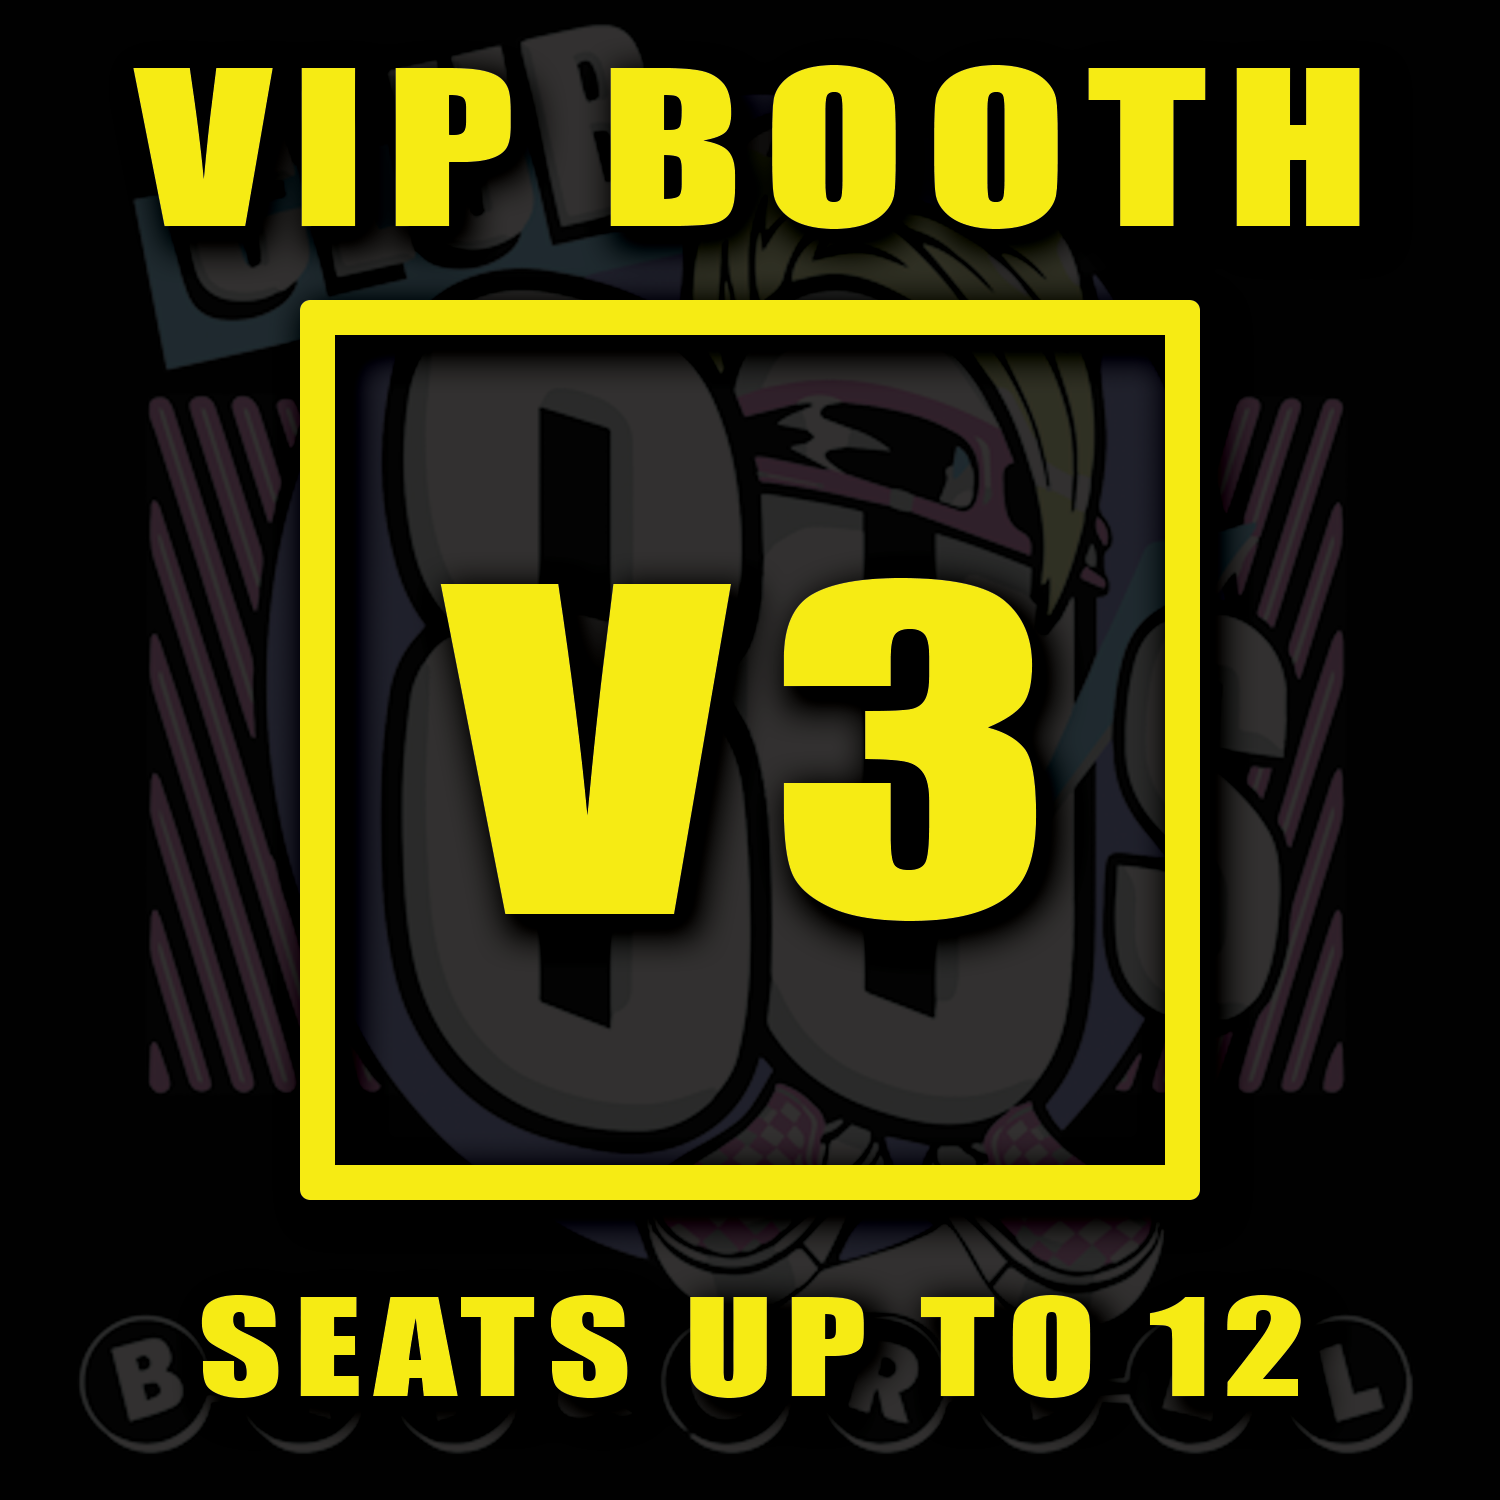 VIP BOOTH V3